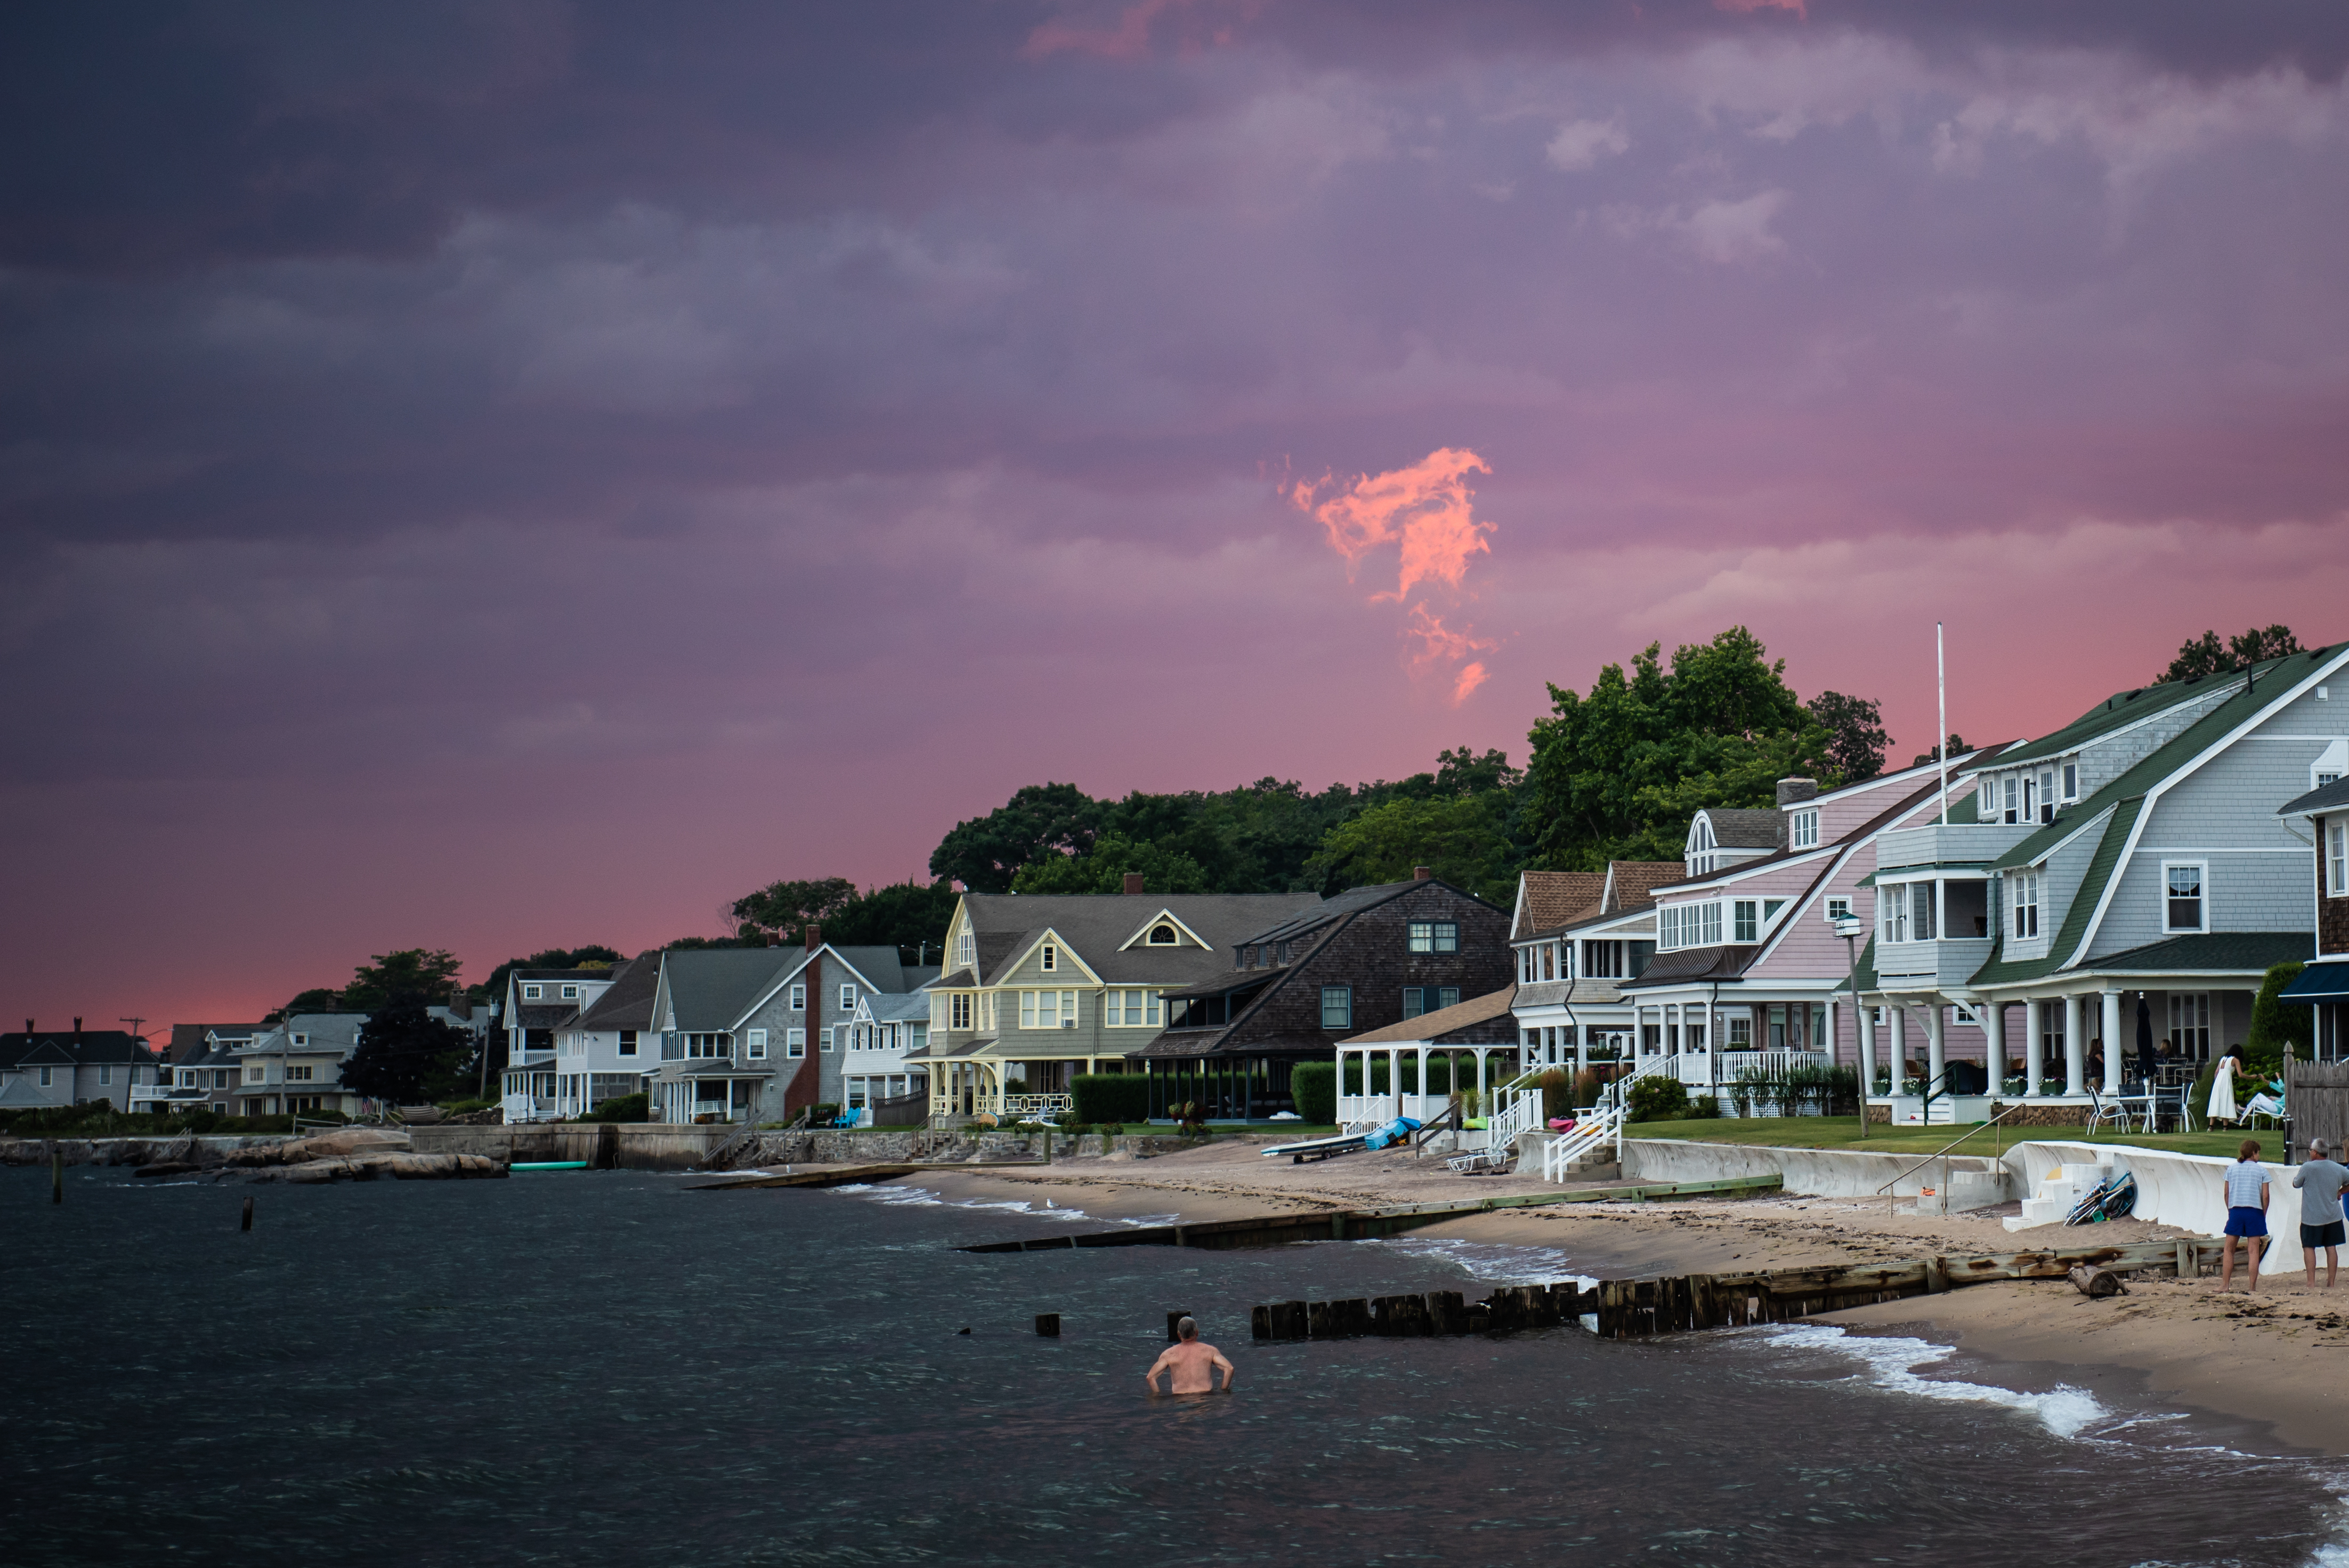 The sky is dark blue with a bit of pink above a shoreline, with houses lining the beach just feet from the water.